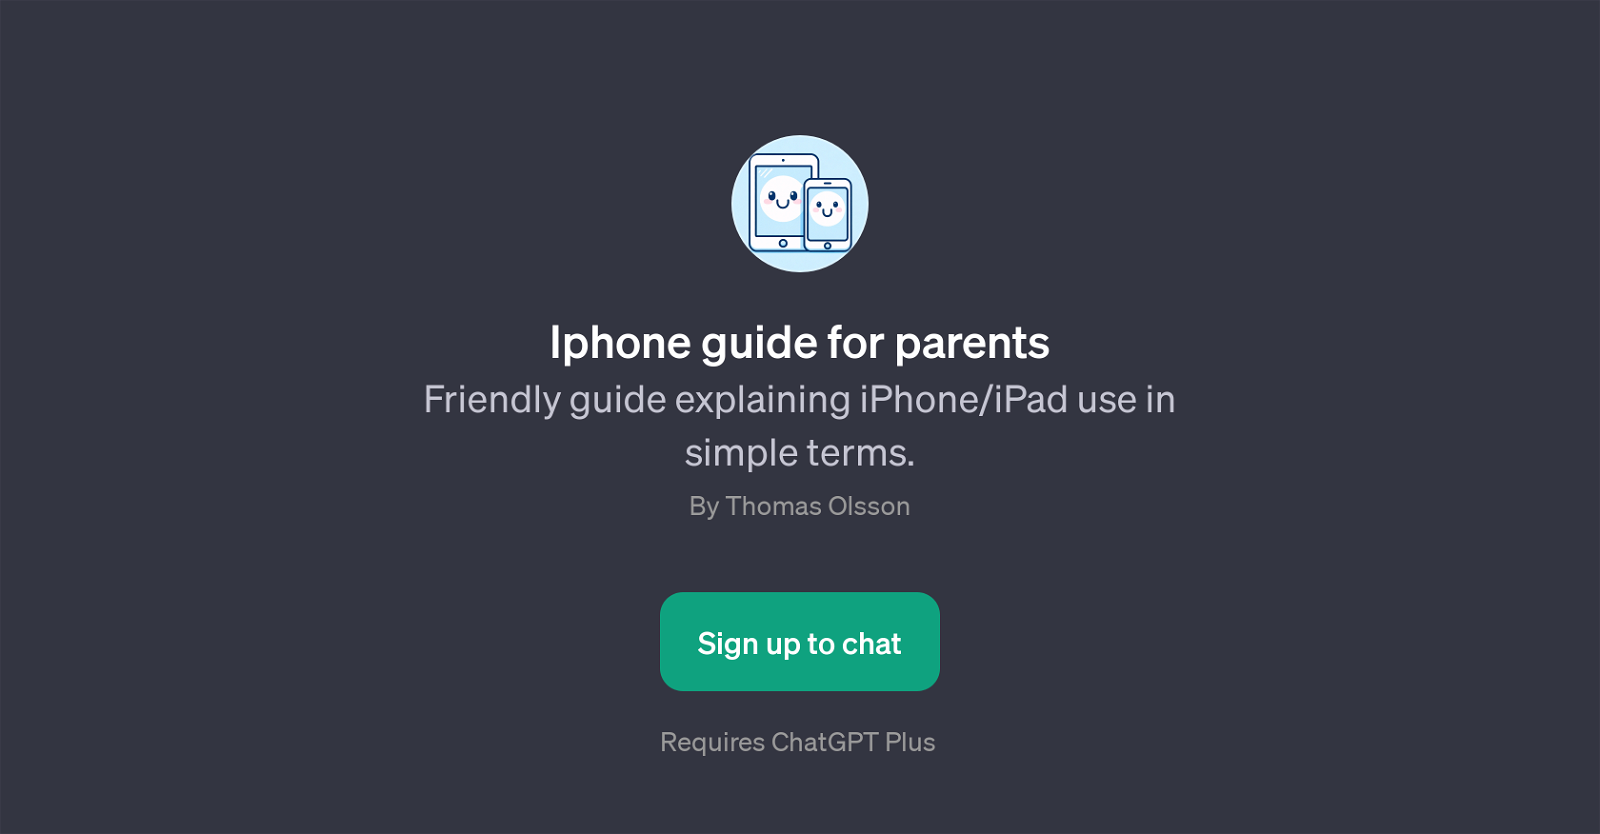 Iphone guide for parents website